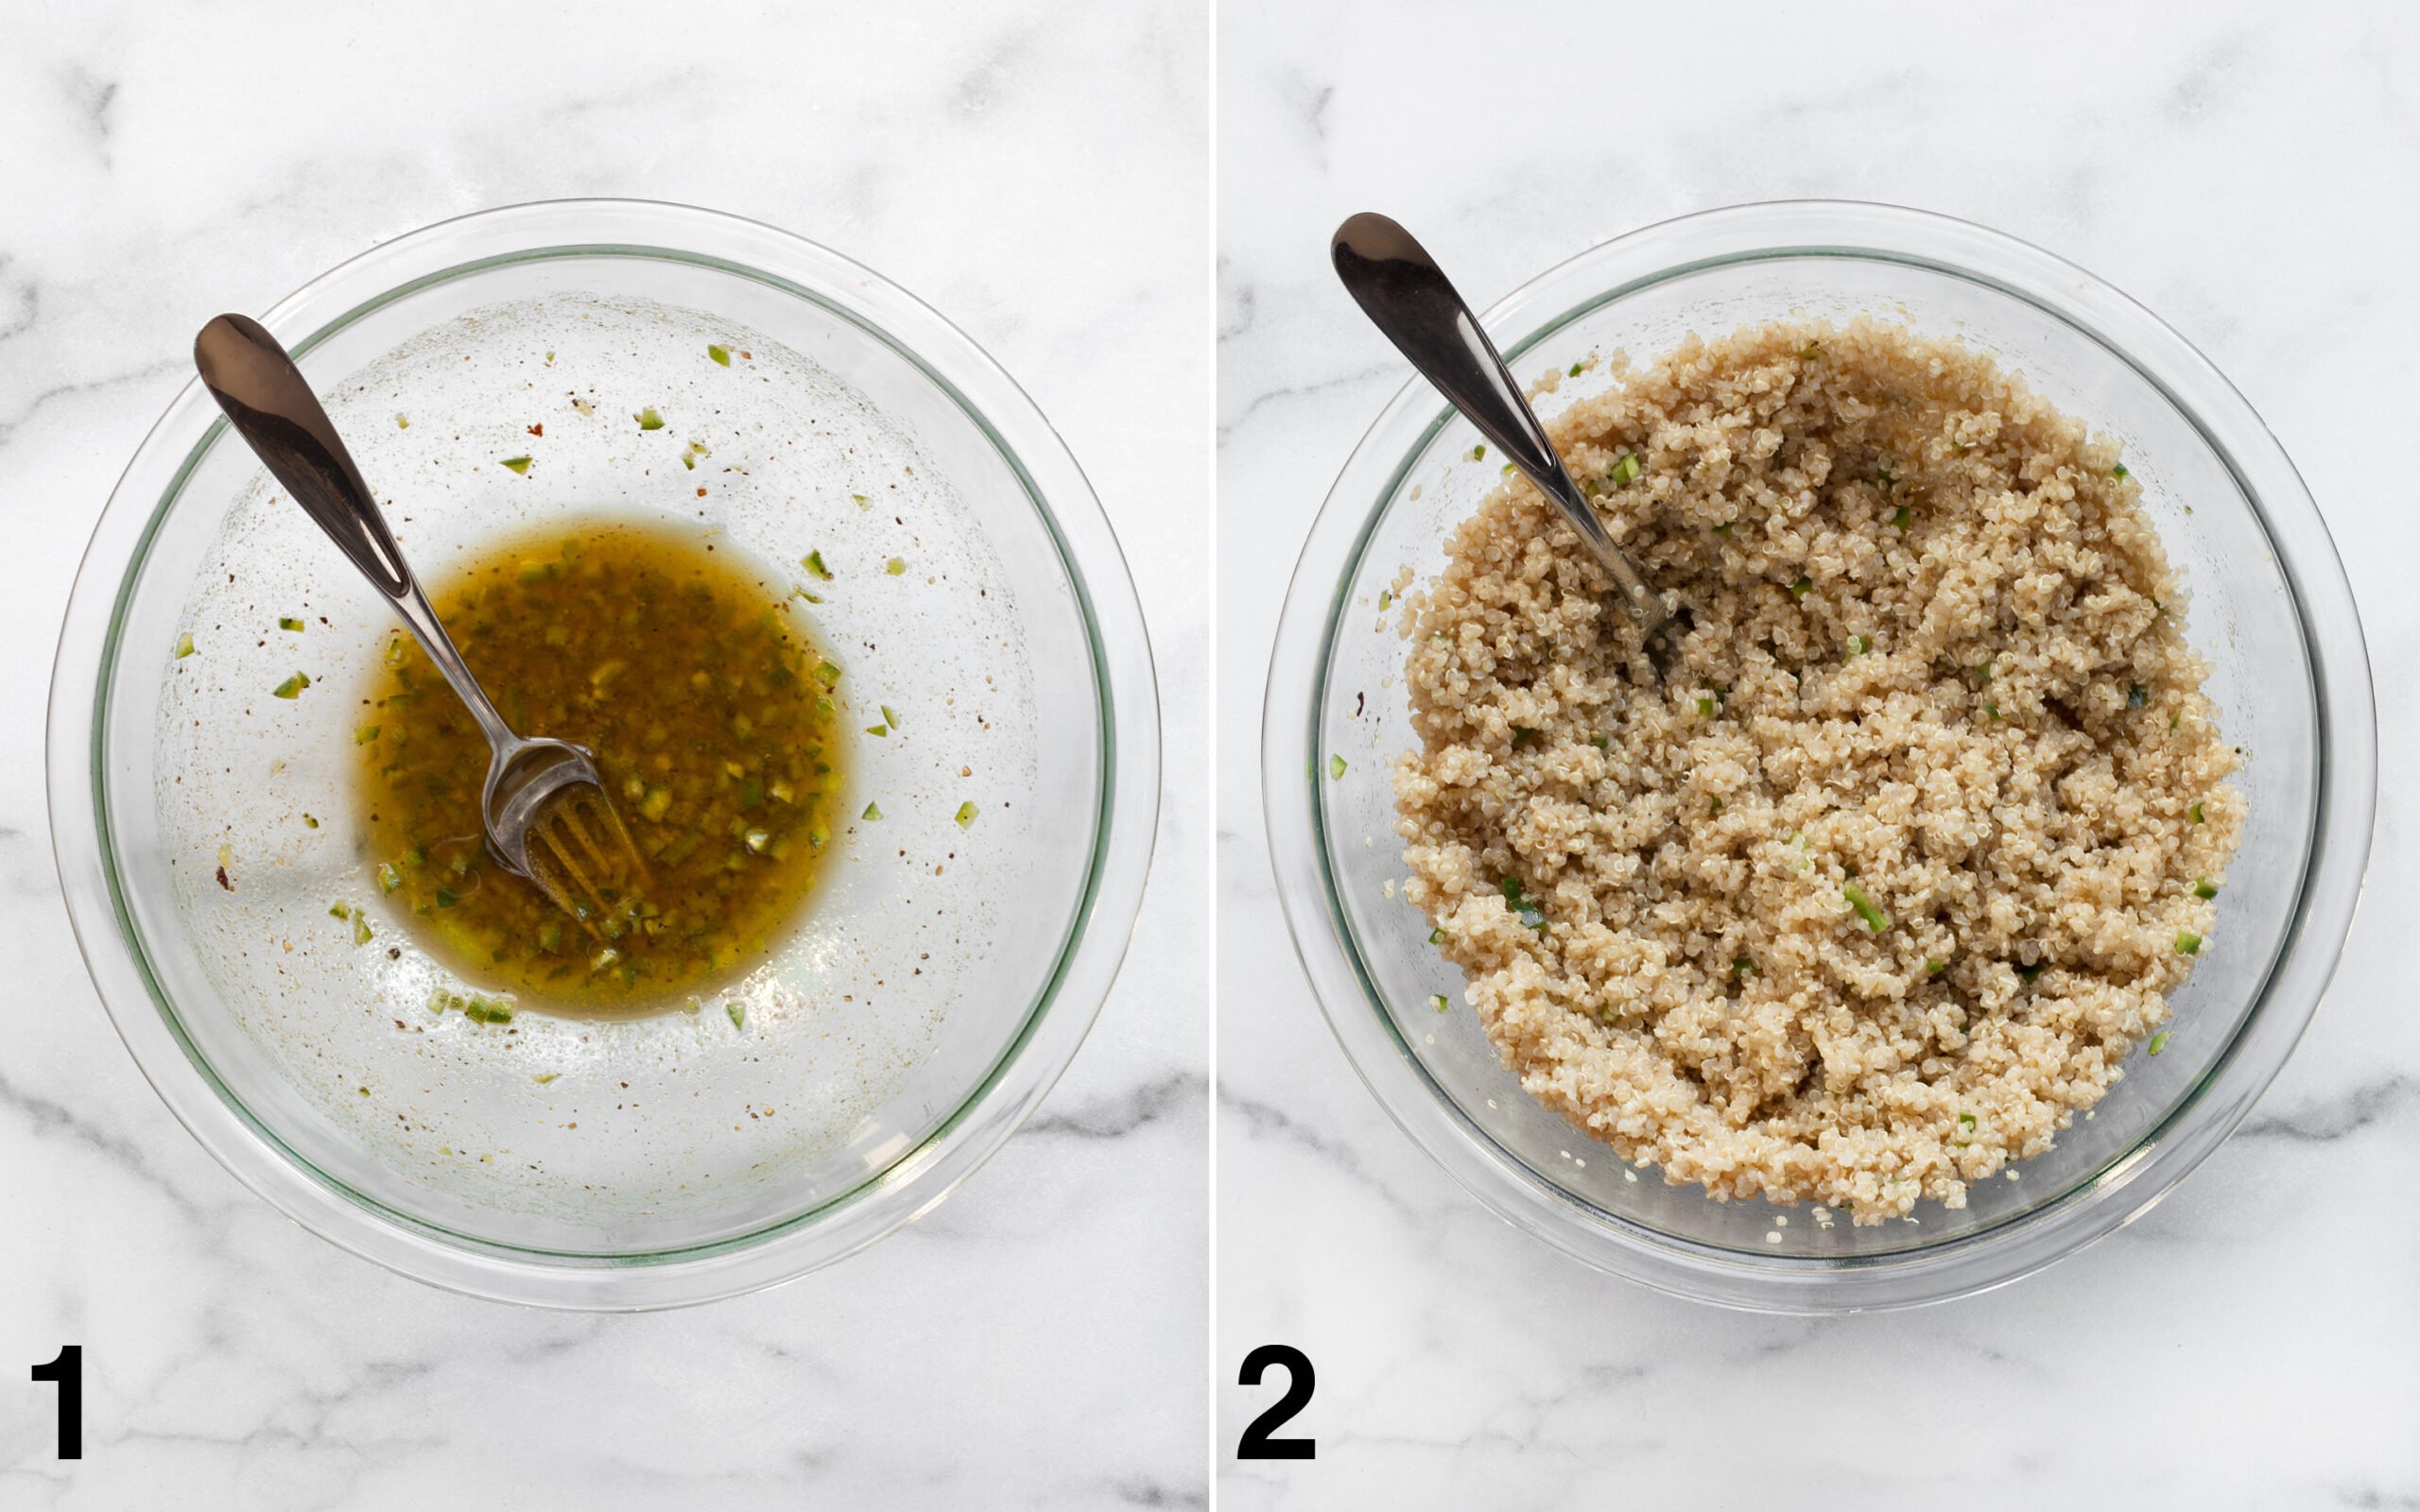 Whisk together the jalapeno lime dressing in a bowl. Then stir in the quinoa.